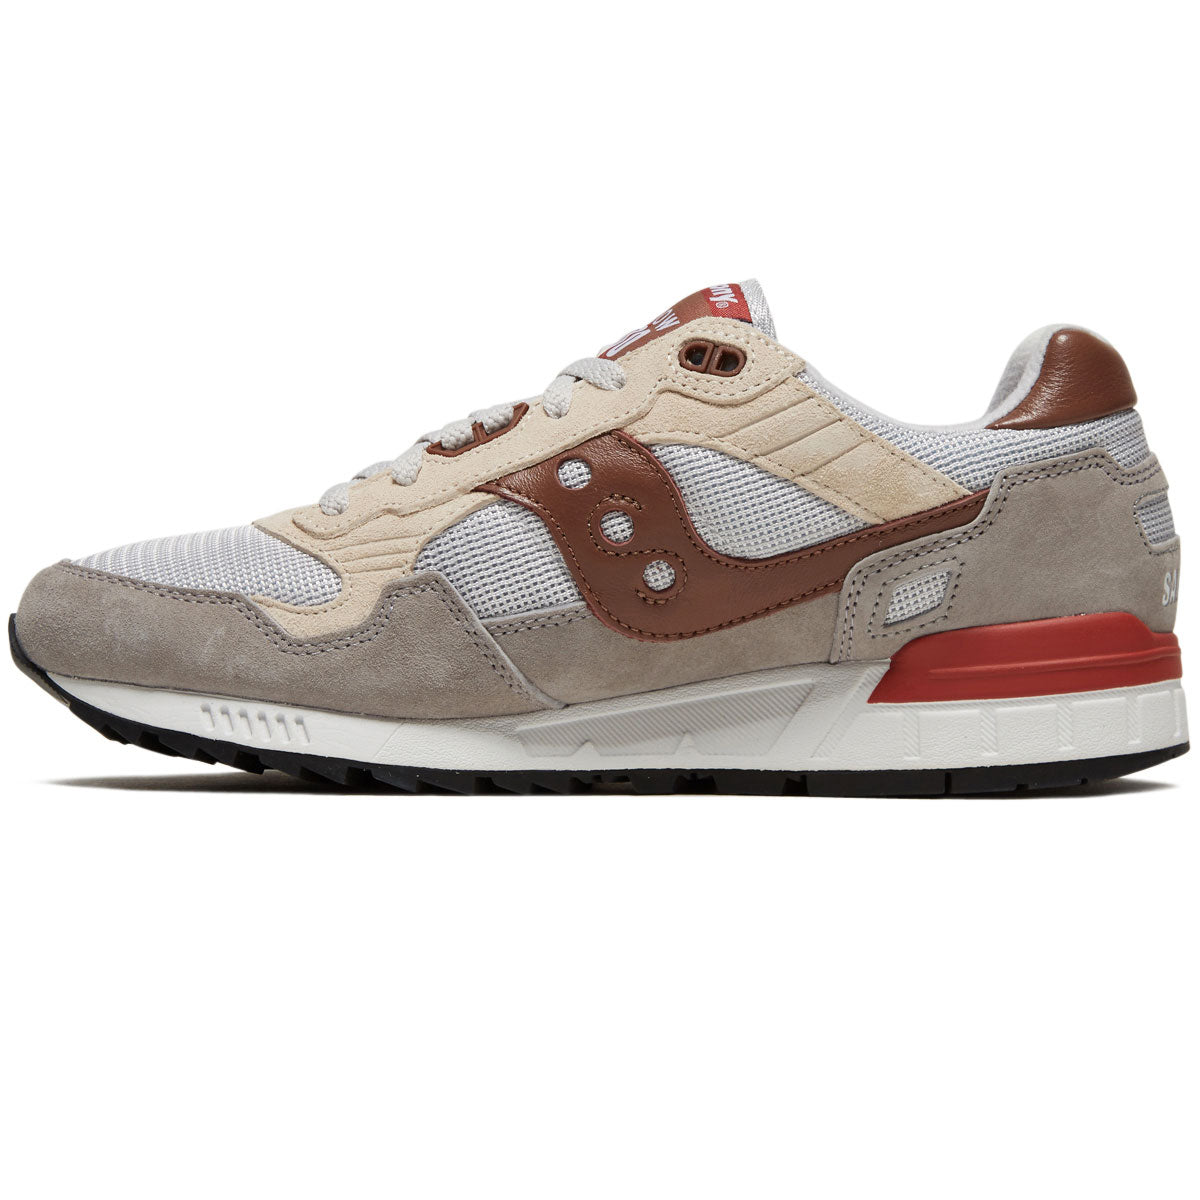 Saucony Shadow 5000 Shoes - Grey/Brown image 2